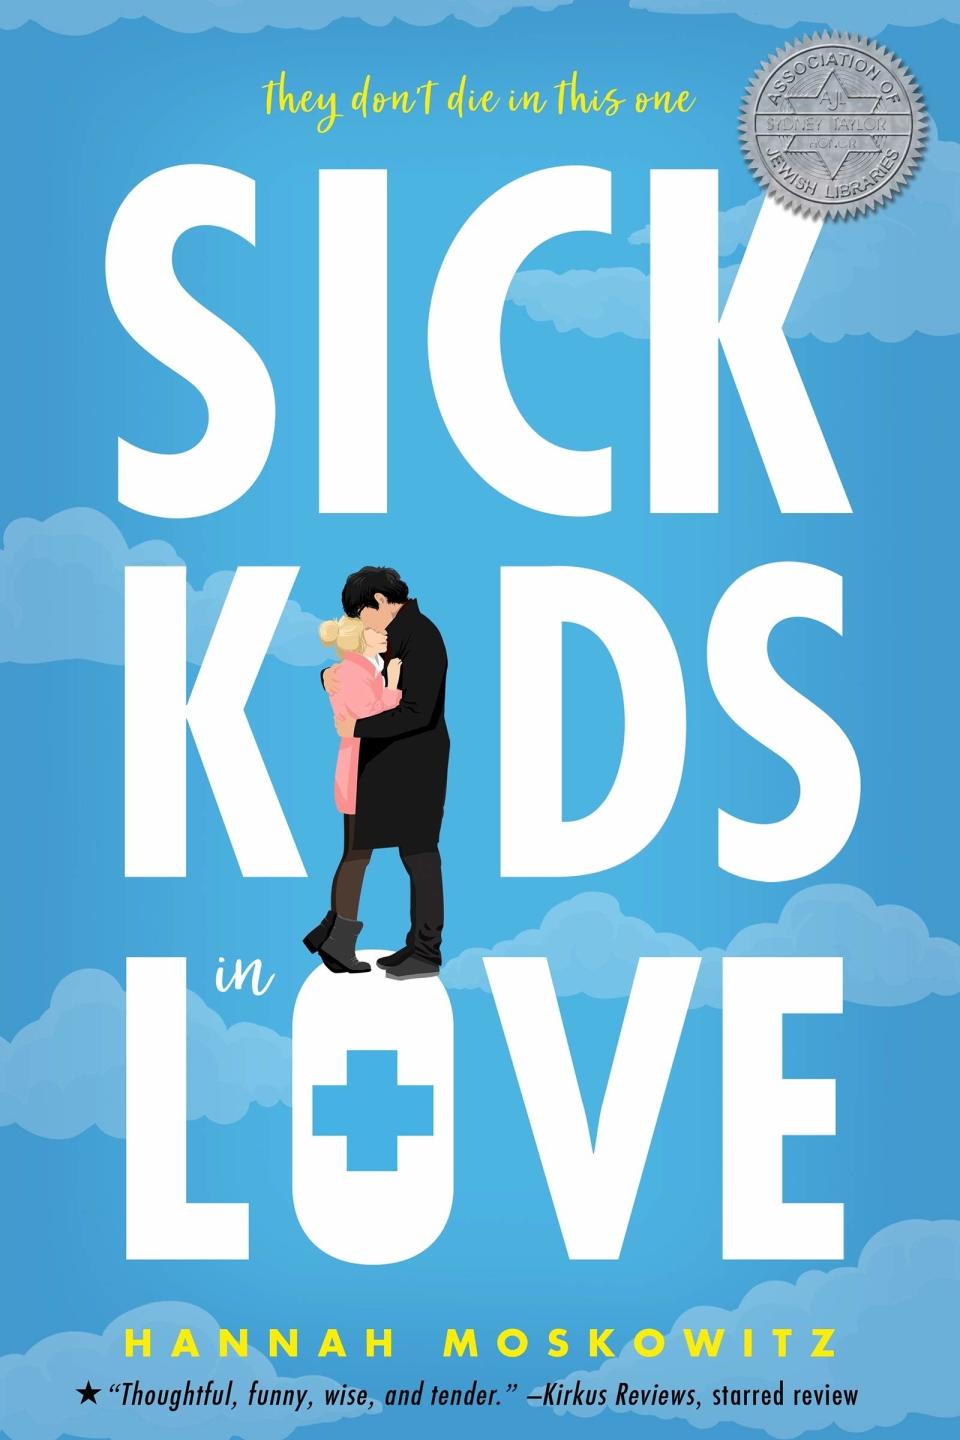 Blue cover with light blue clouds. Title reads: Sick Kids in Love. Instead of an "I" there are two white teenagers, a girl in a pink coat and a boy in a black coat. Tagline reads: "They don't die in this one."